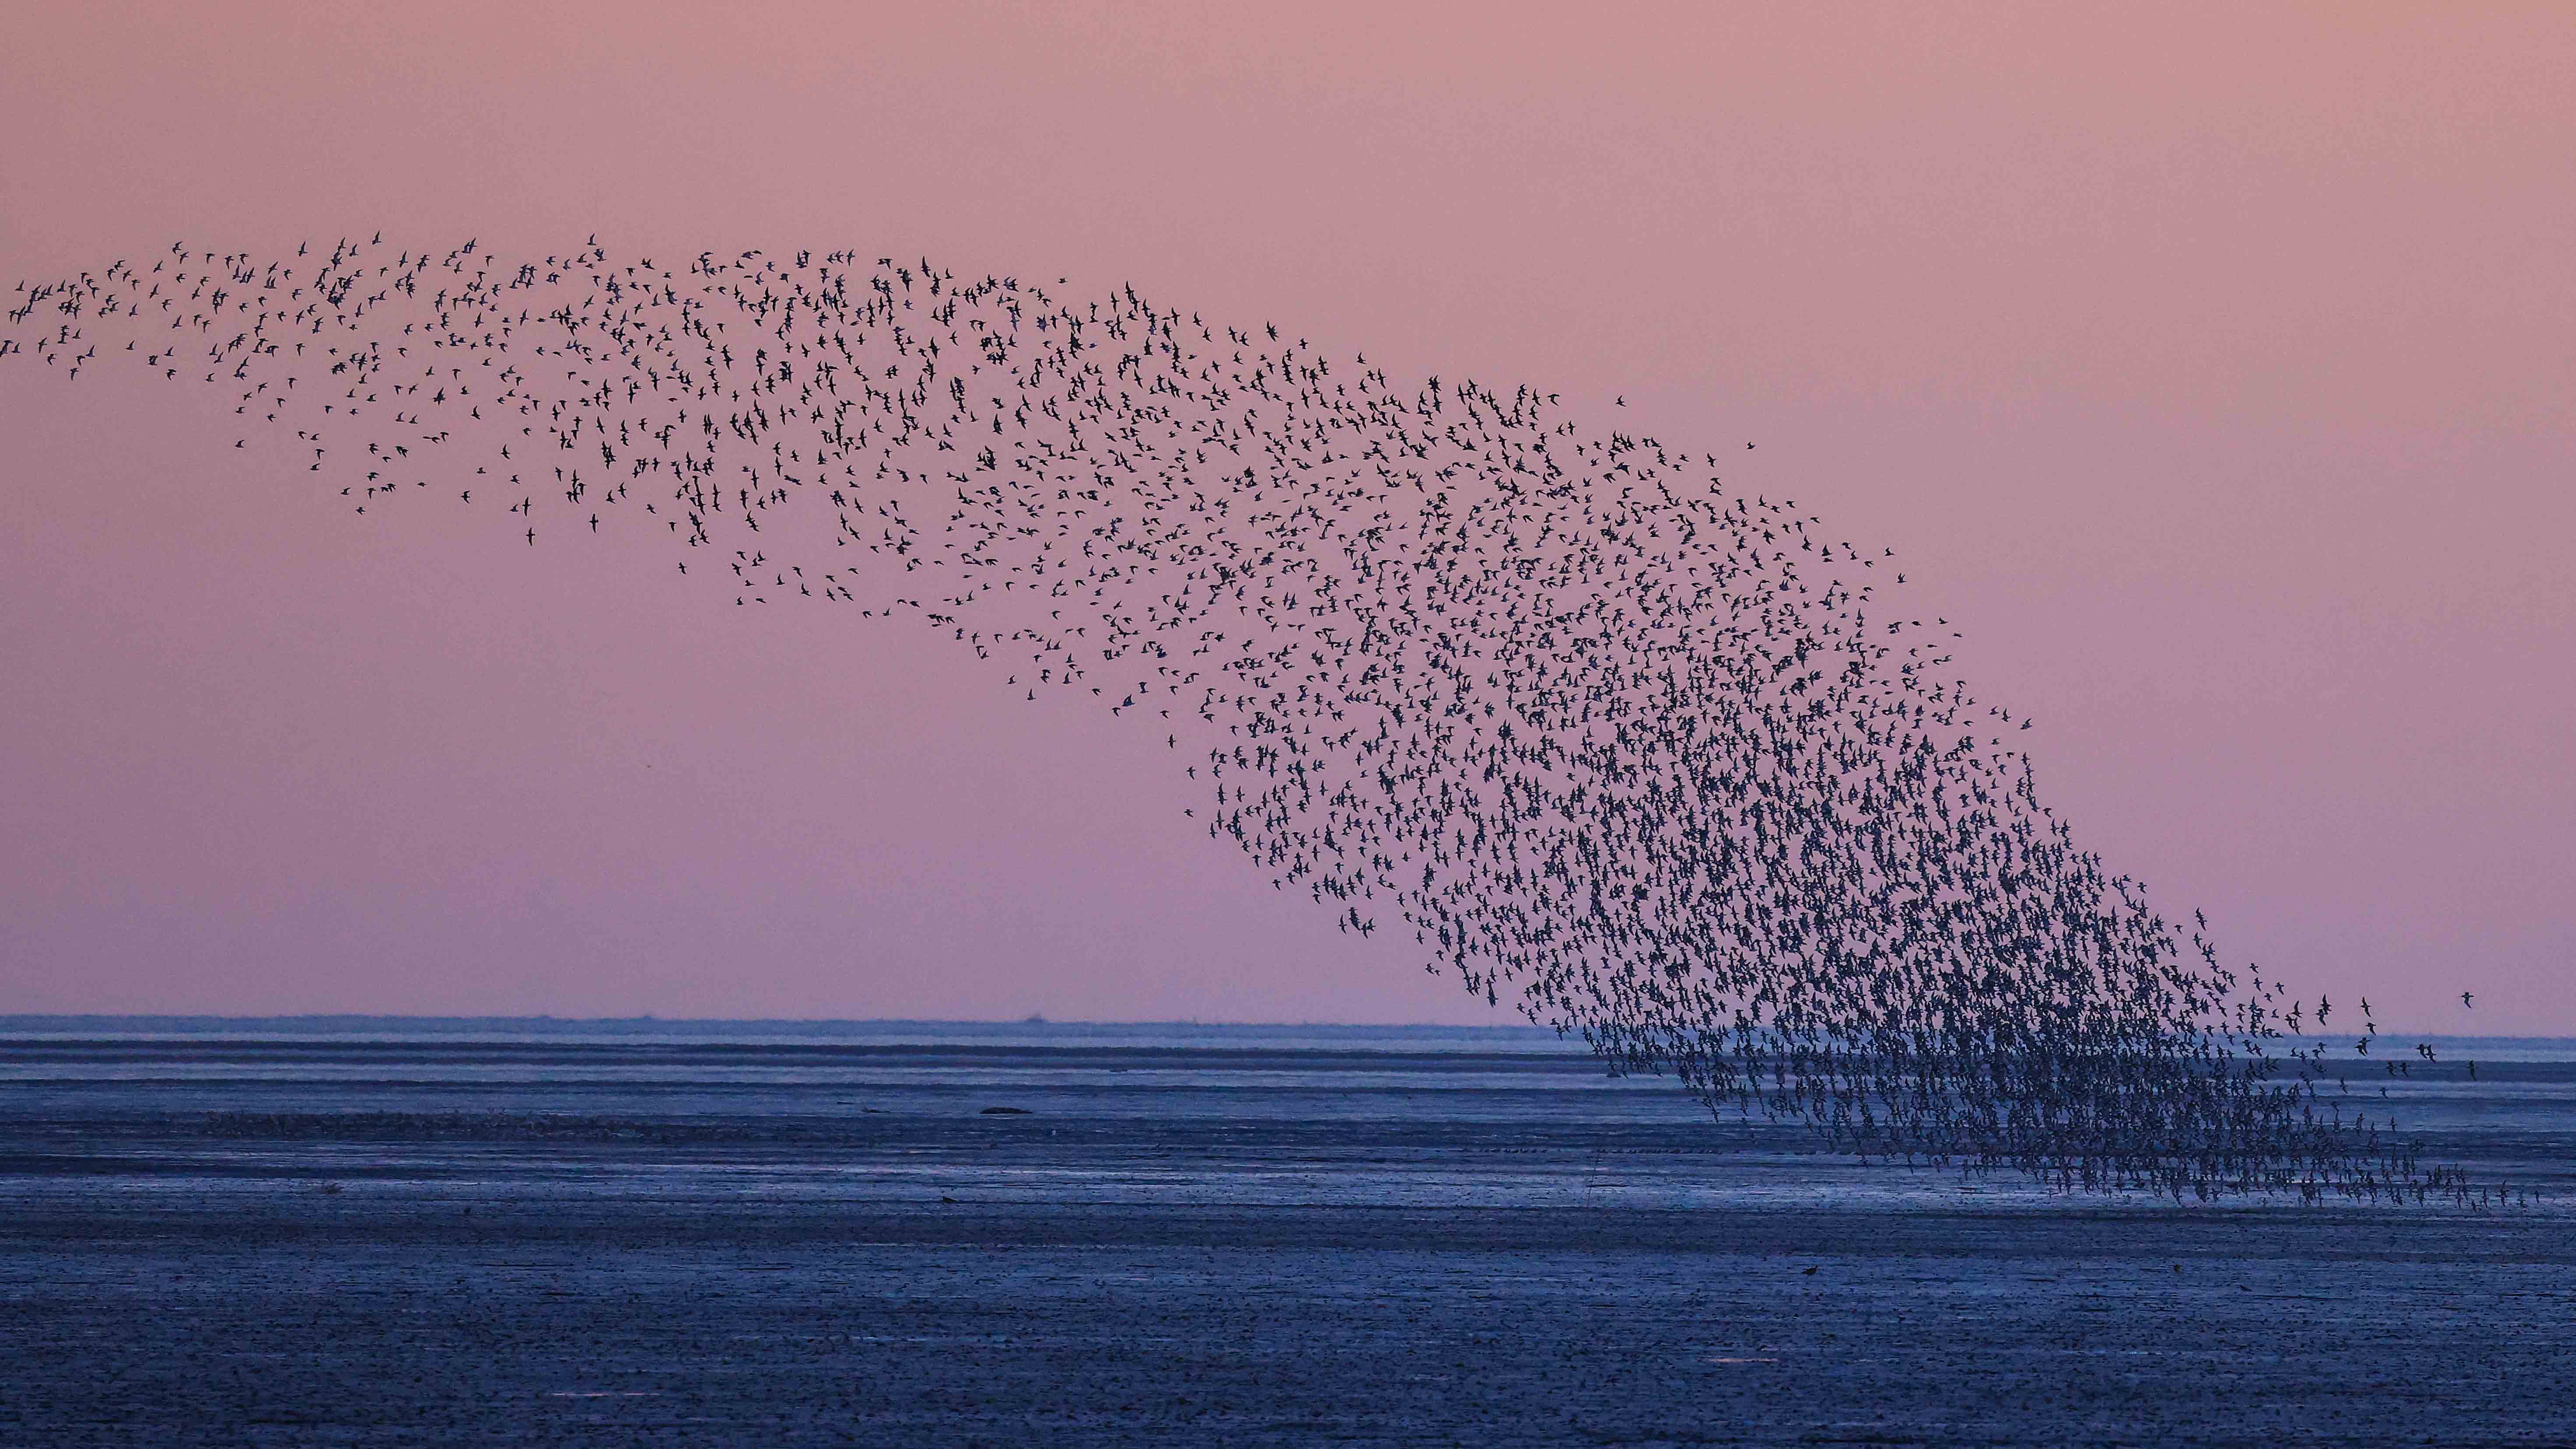 'Bird wave':  One of the most wonderful views on Earth